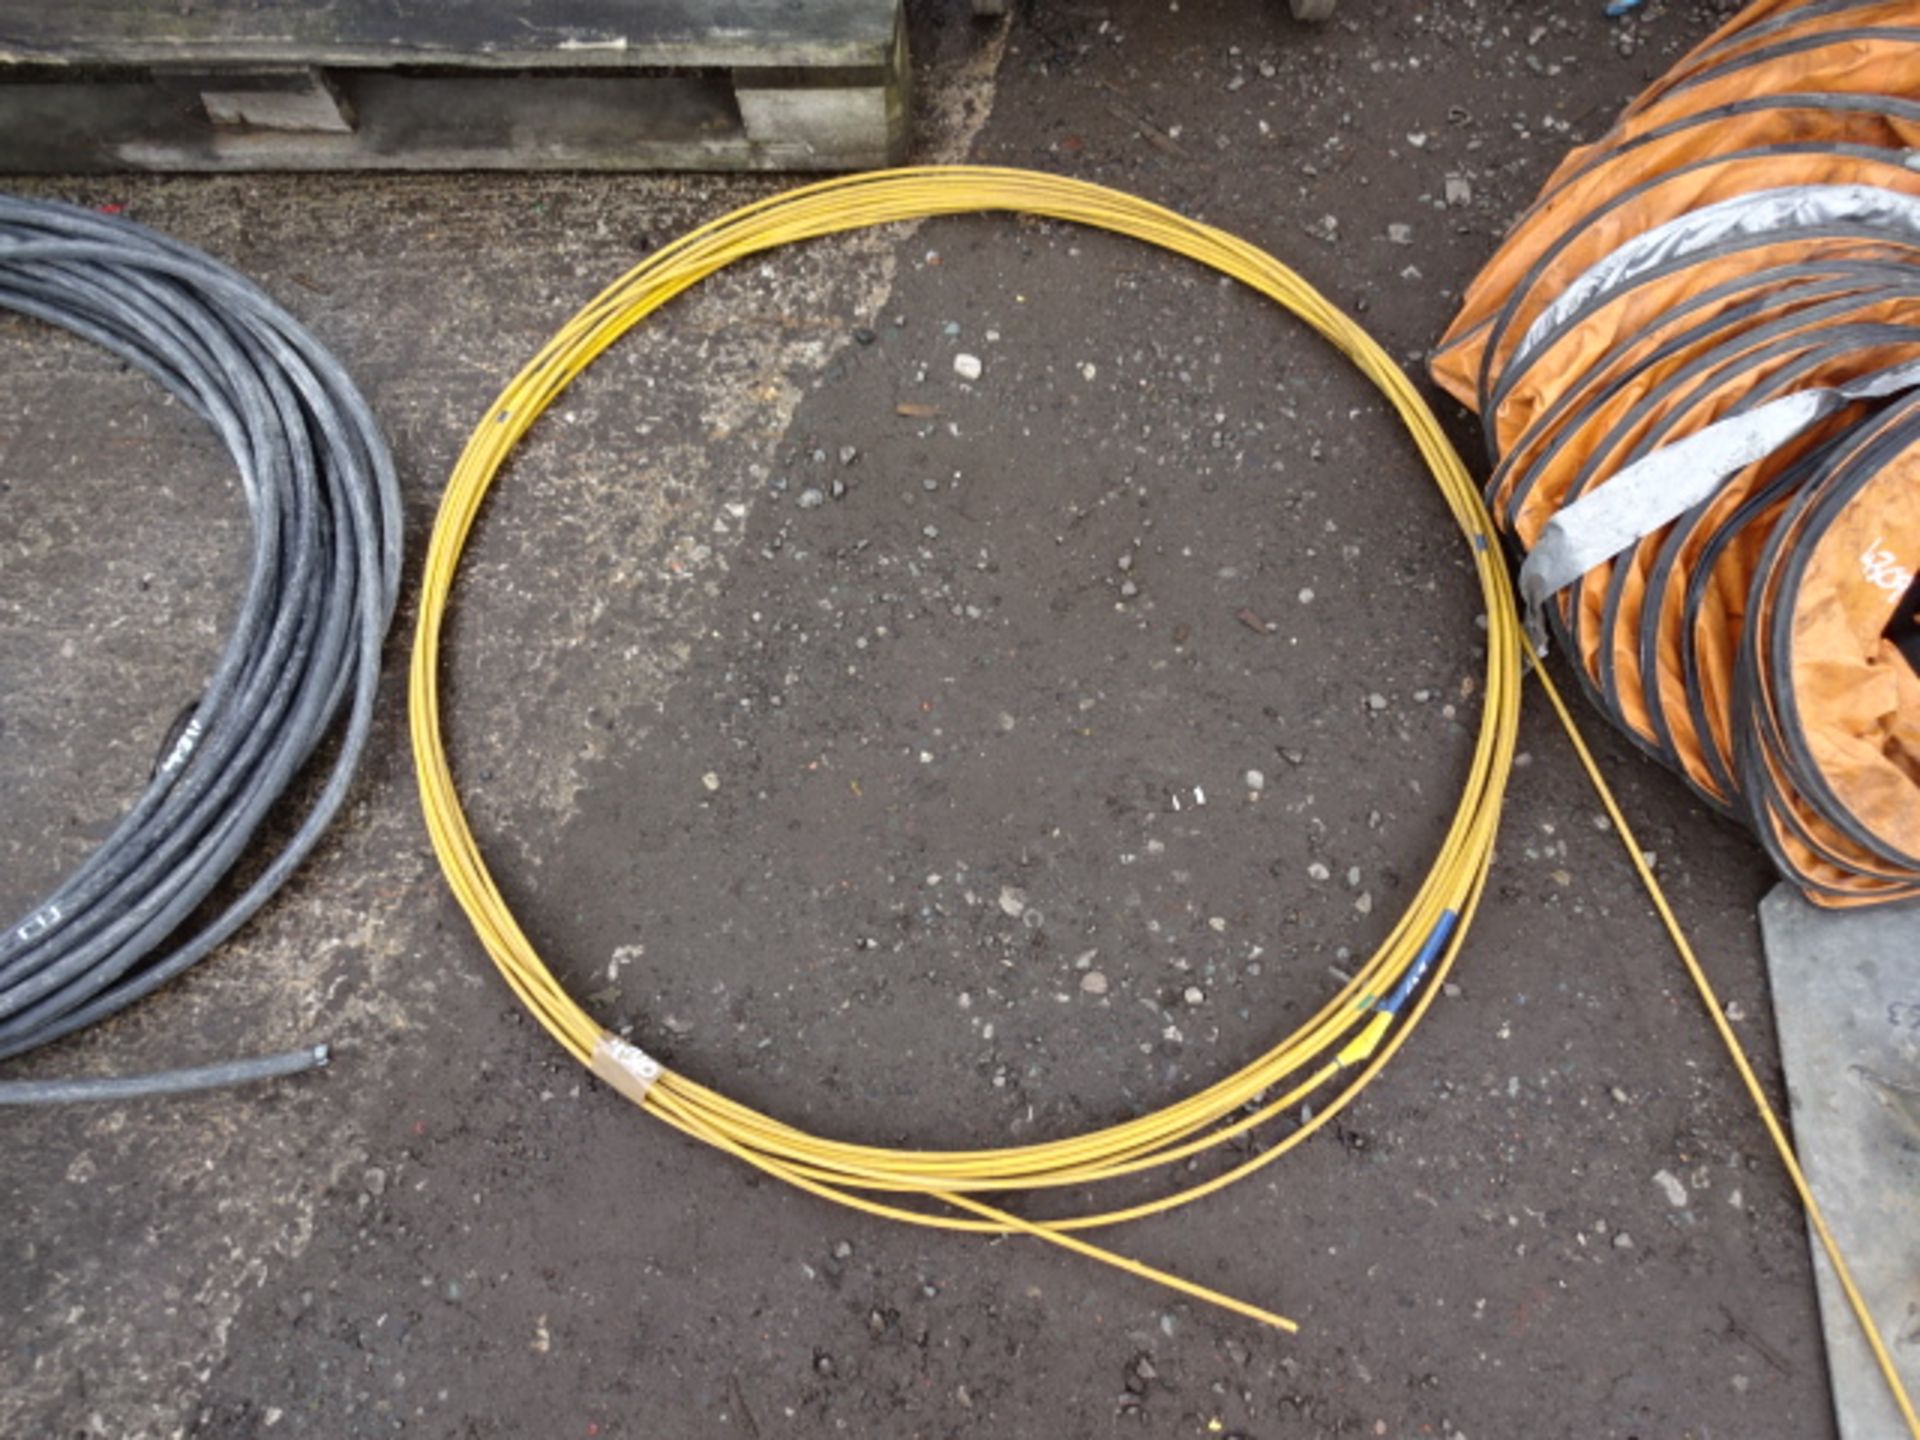 Cobra cable inspection reel